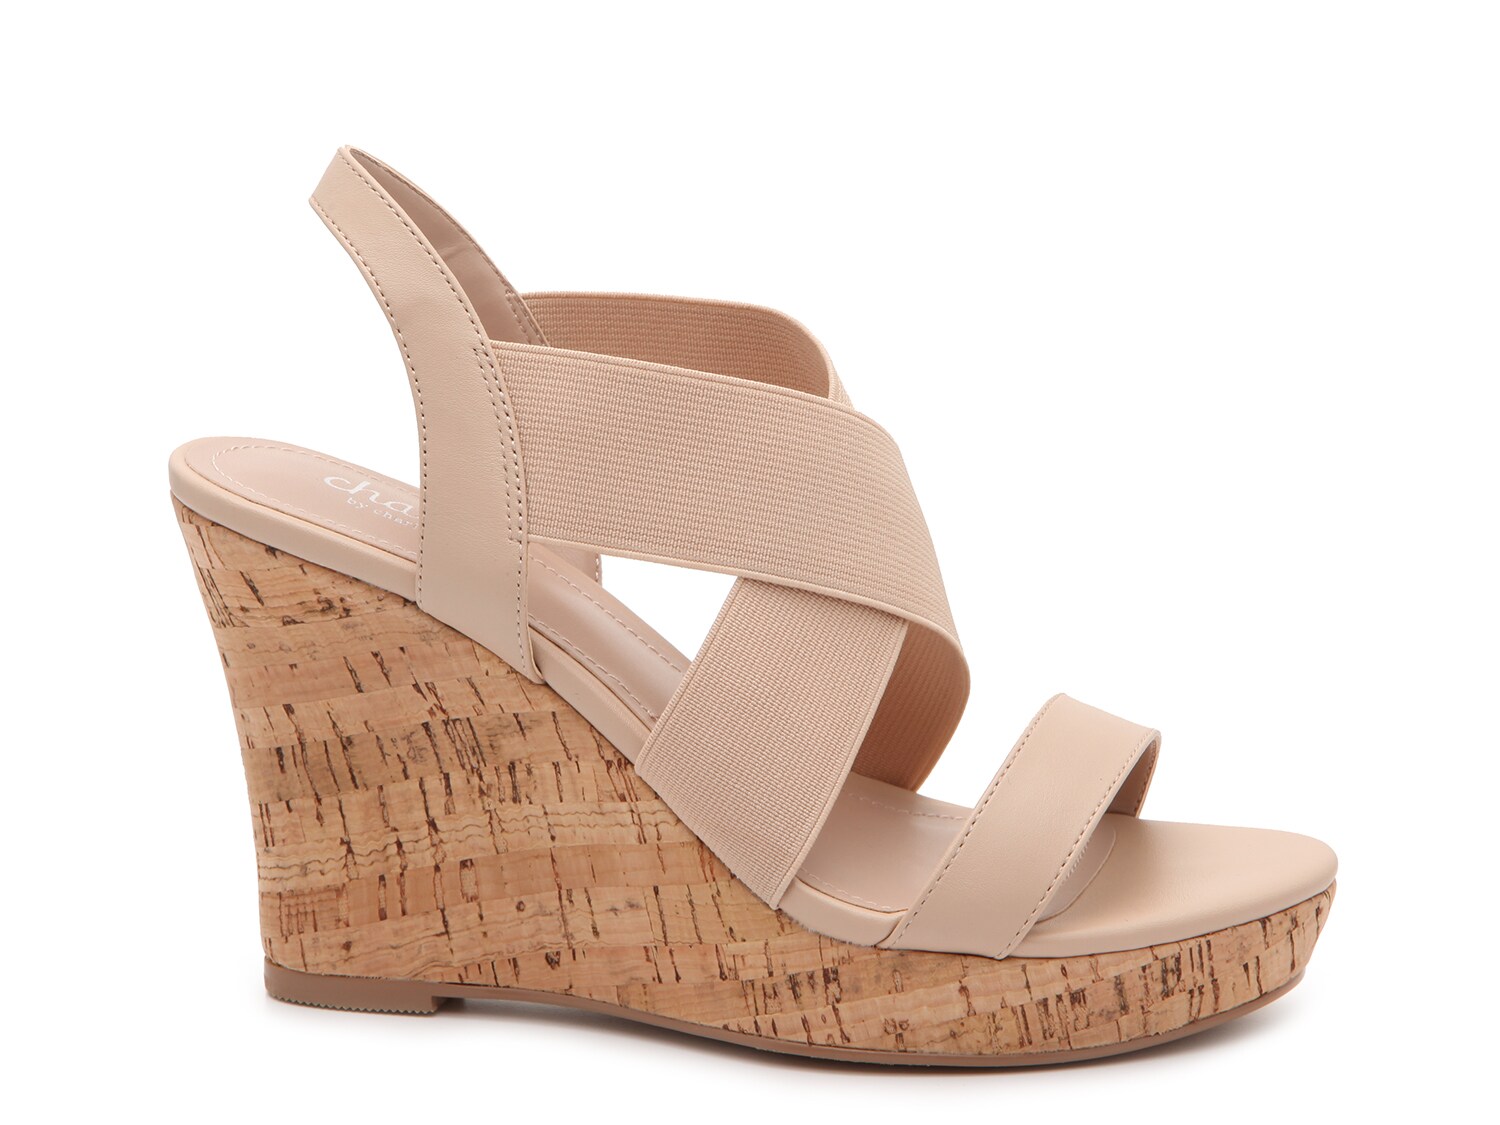 Charles by Charles David Lupita Wedge Sandal Women's Shoes | DSW